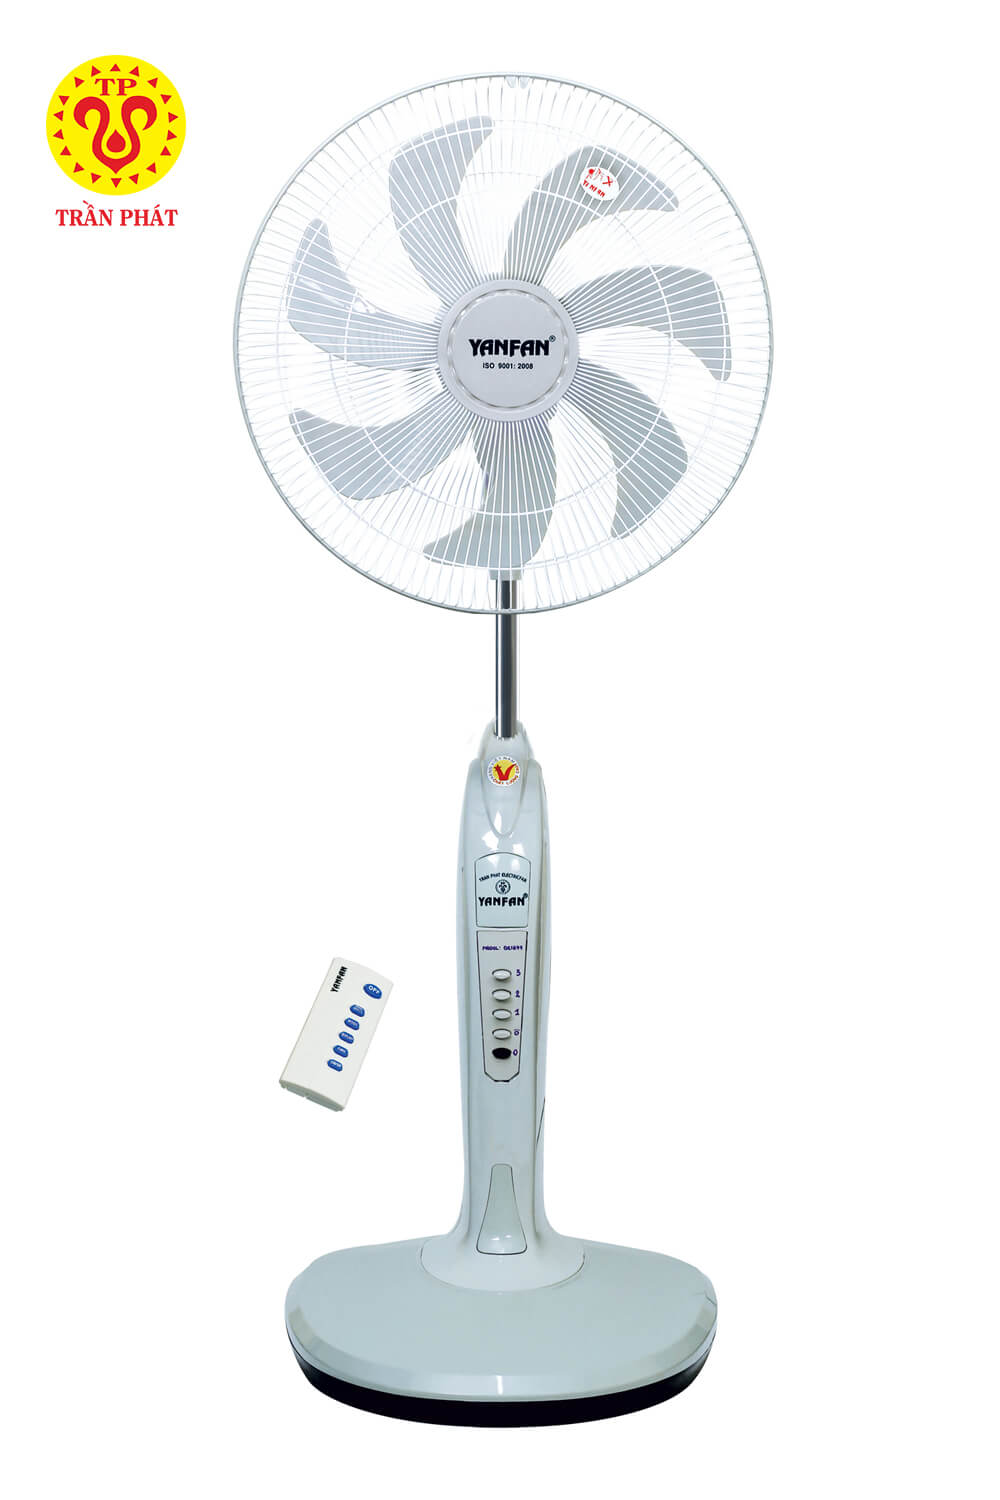 Control stand fan with outstanding features